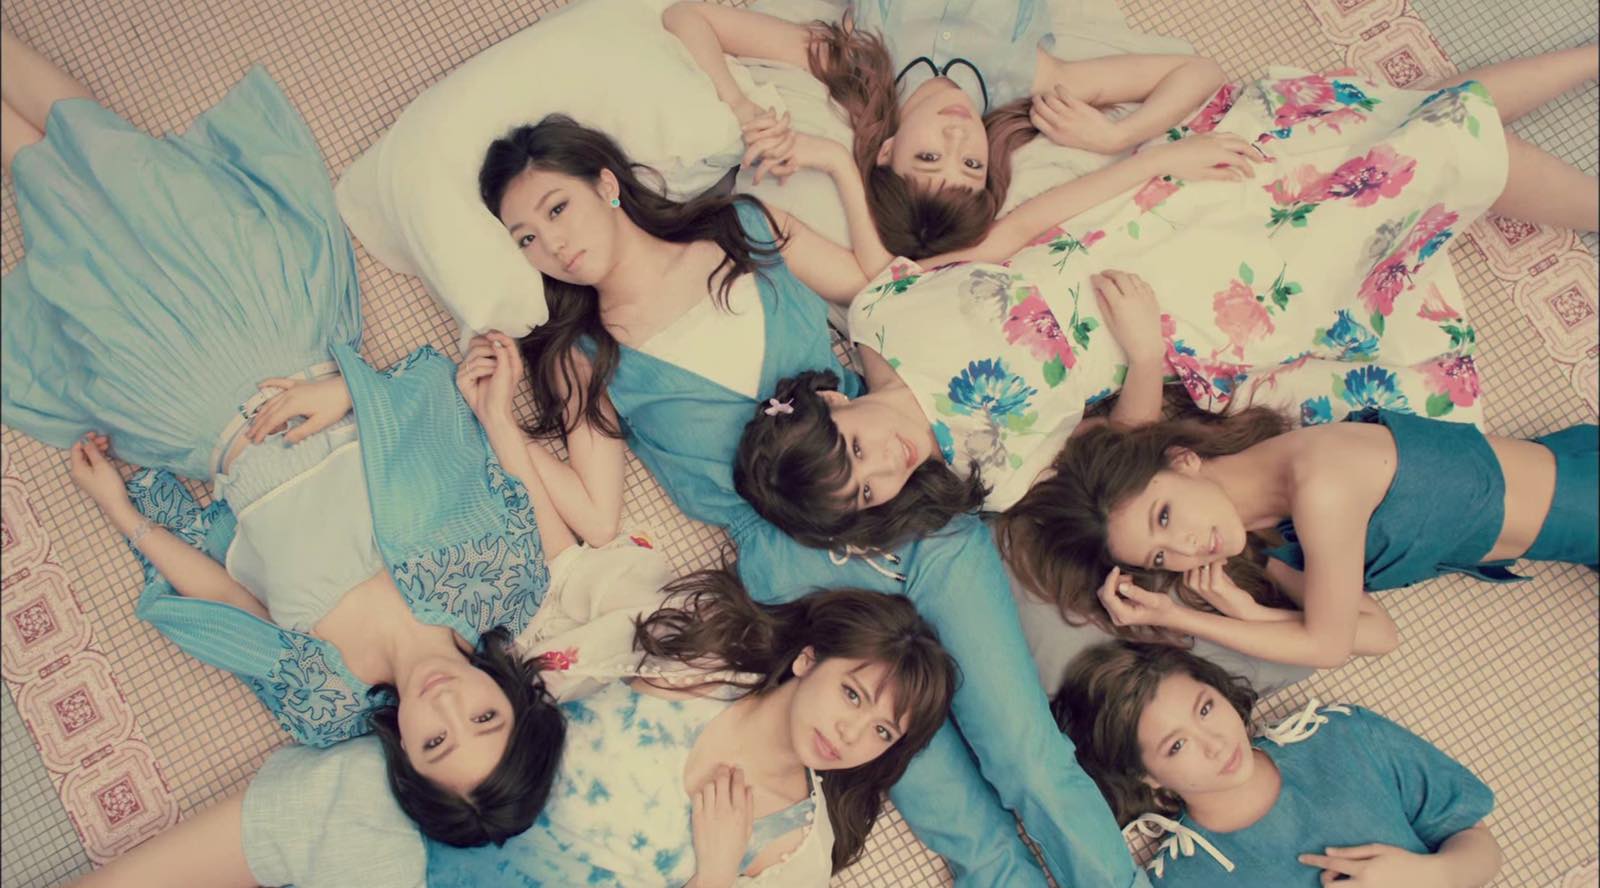 The MV for Flower’s 10th Single “Blue Sky Blue” is as Refreshing as a Warm Spring Breeze!